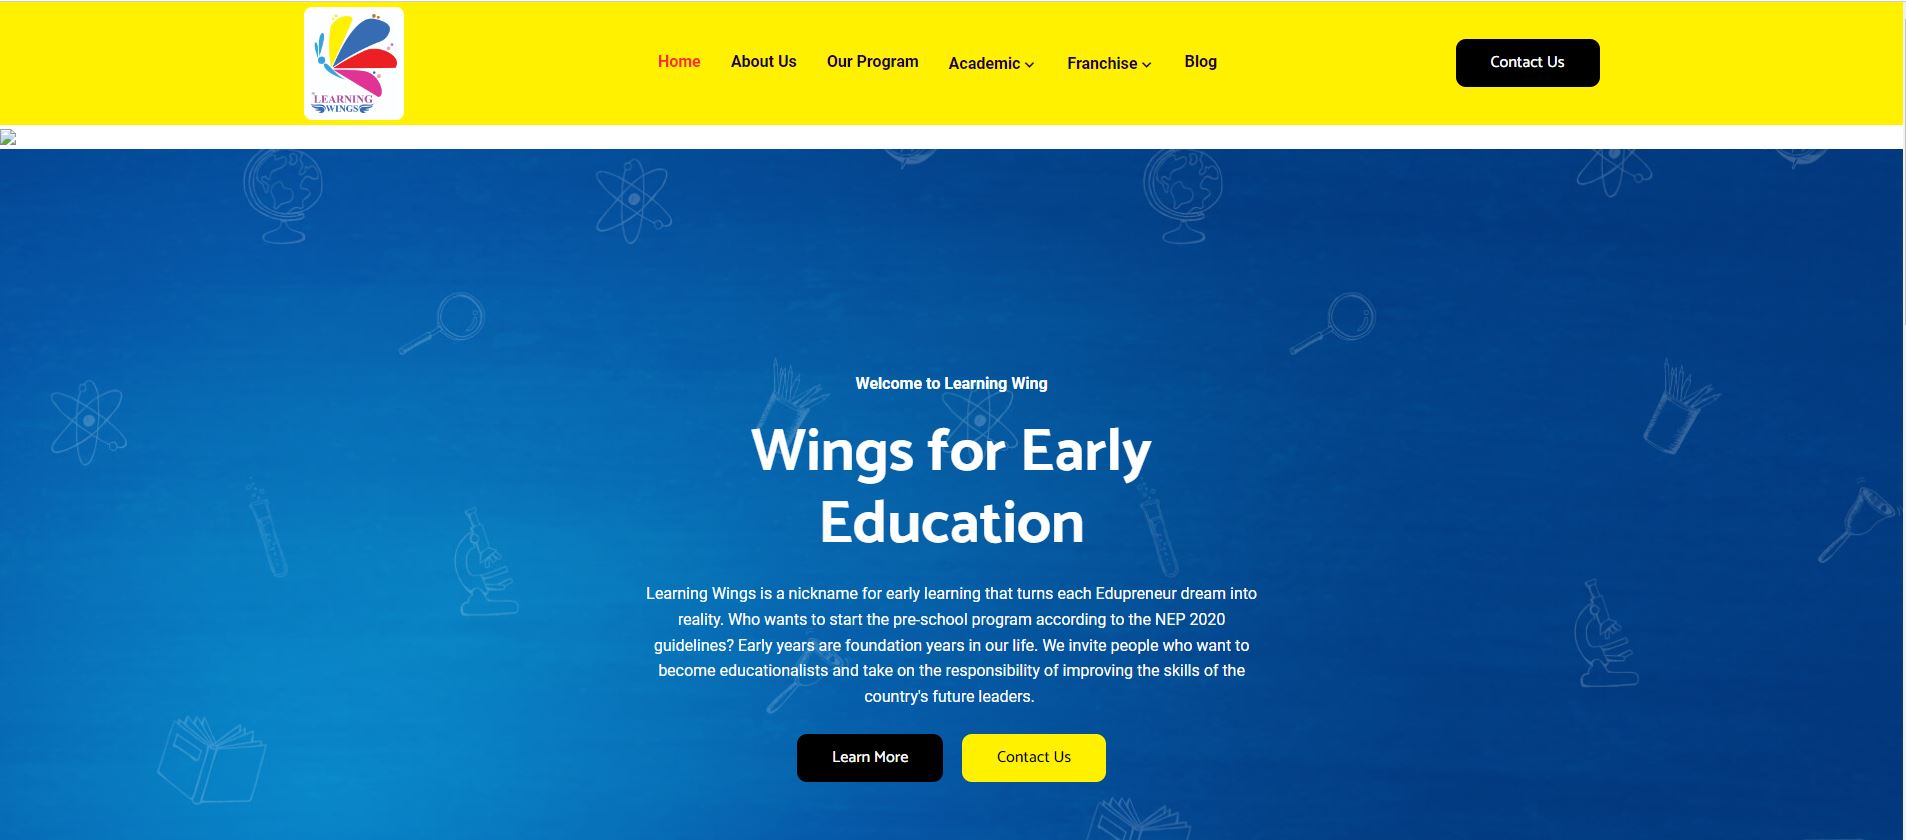 How to get Learning Wings Franchise in 2023 – Profit, Investment